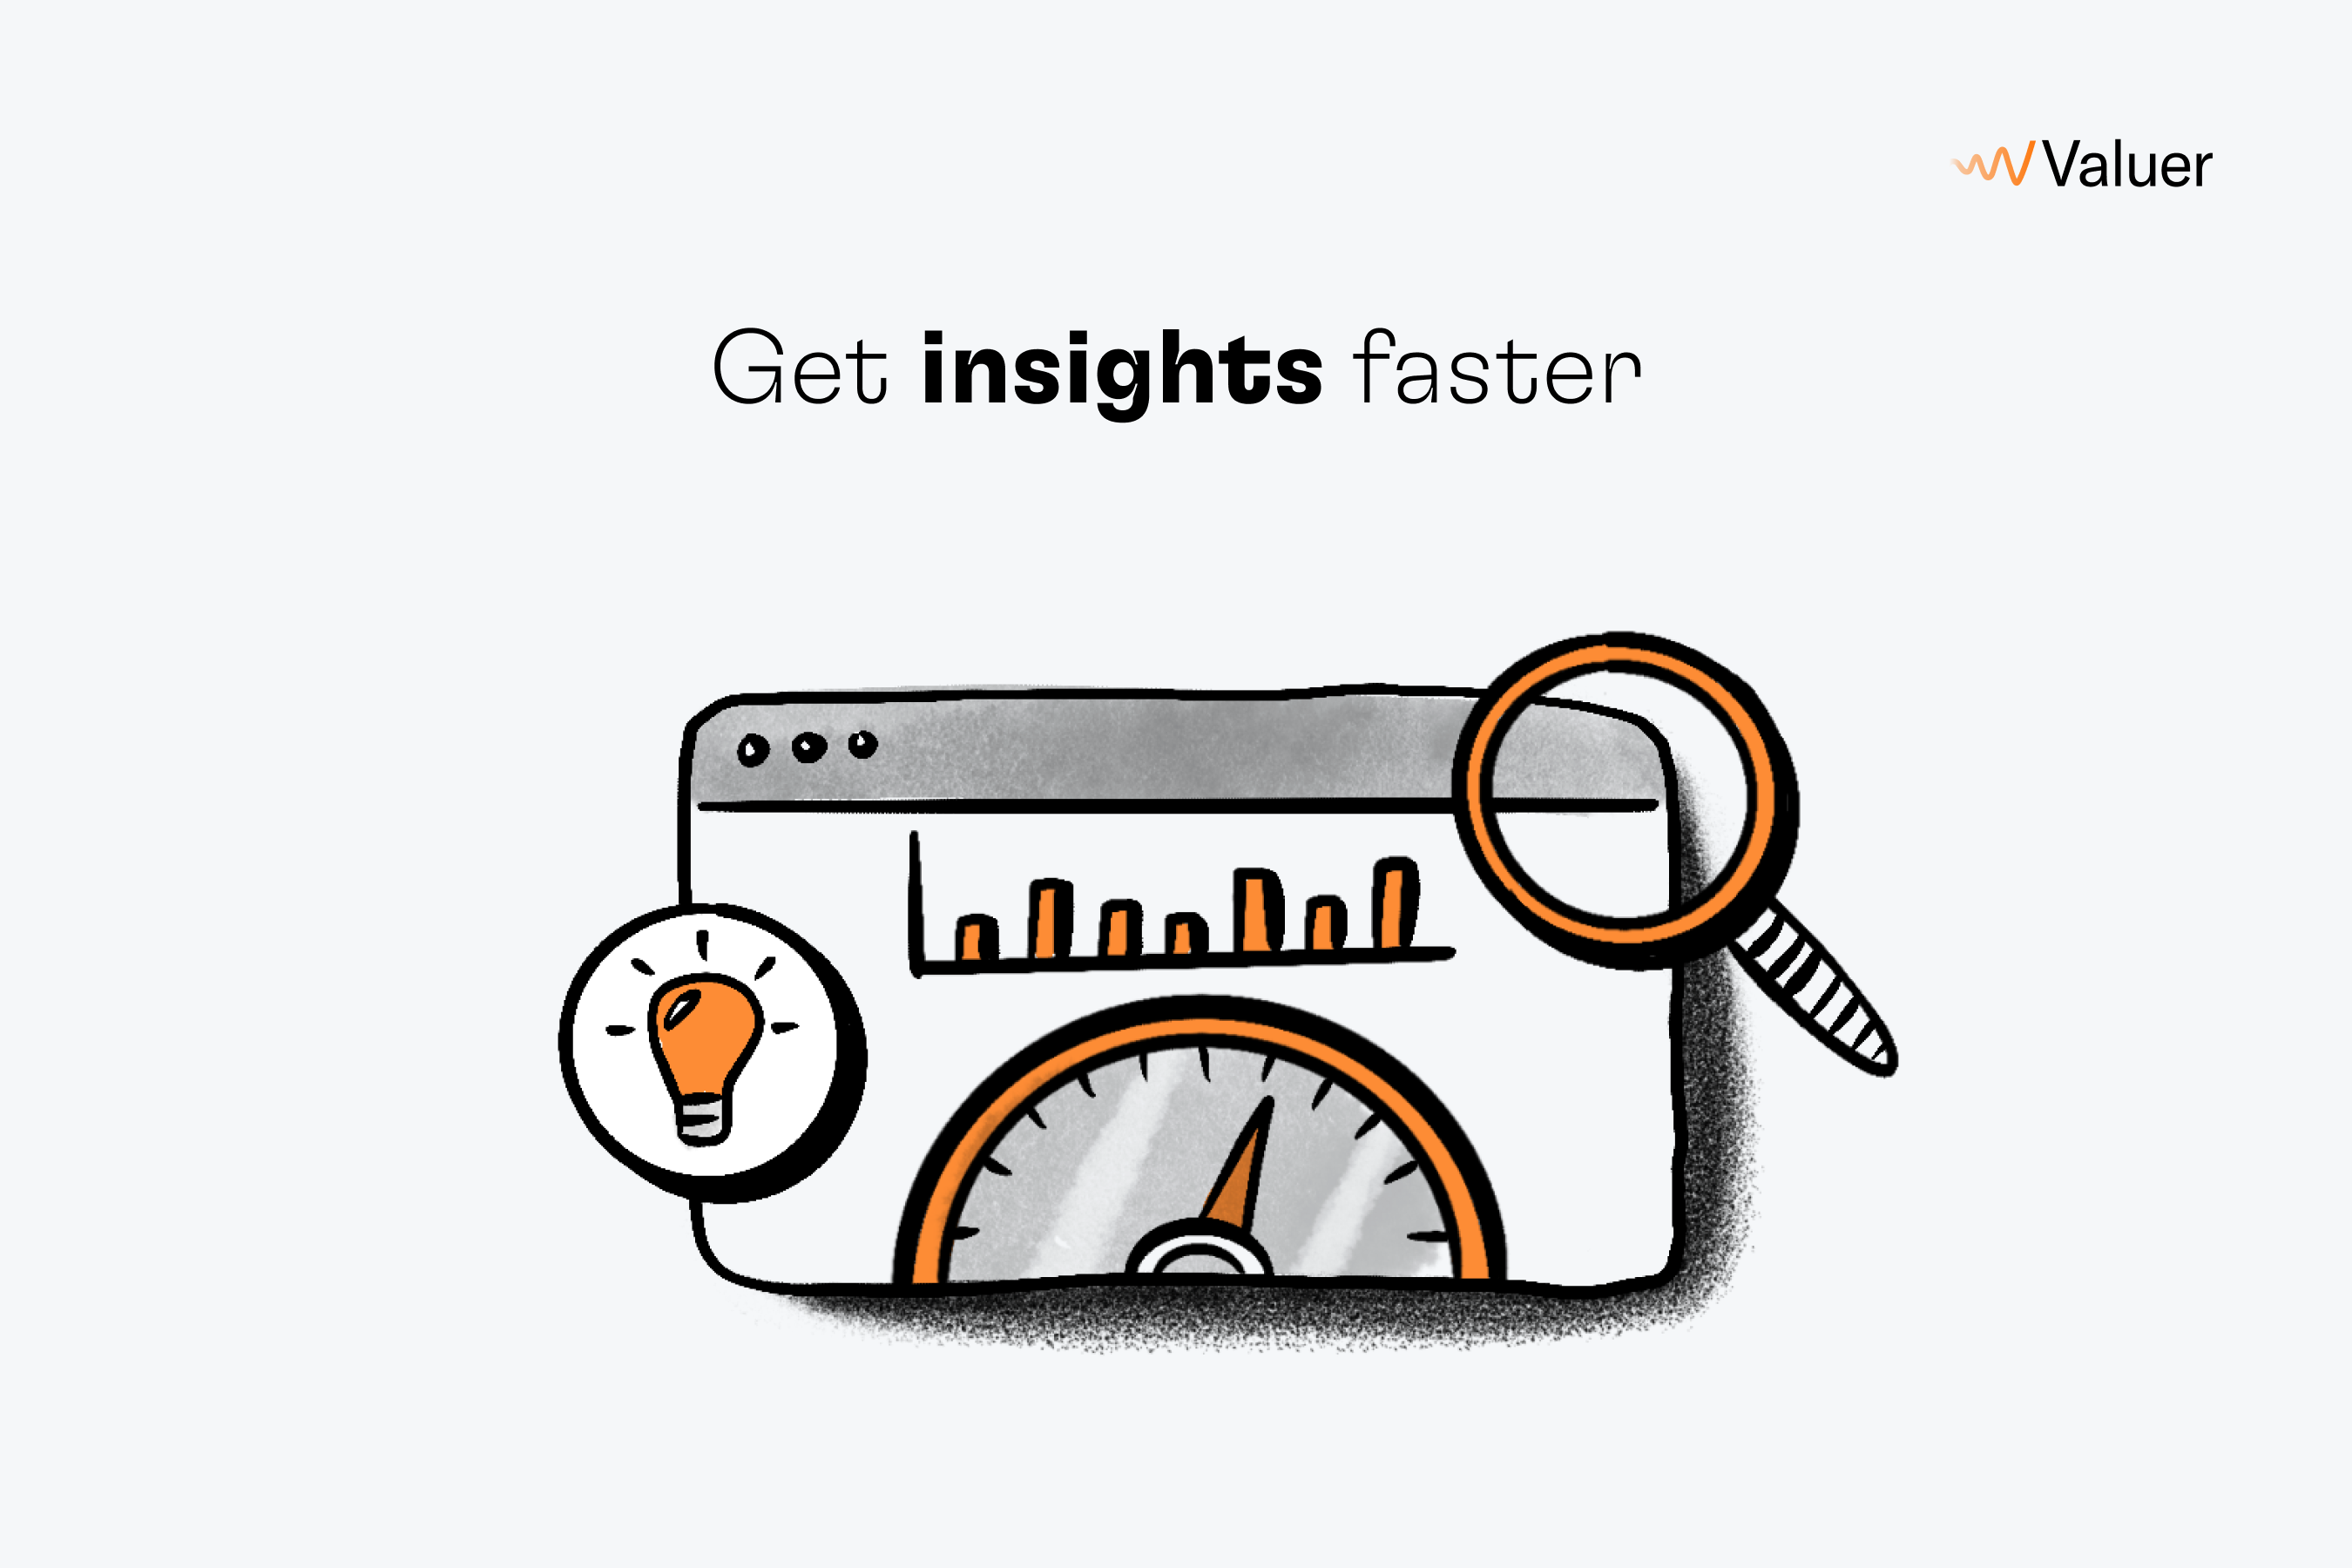 Get insights faster